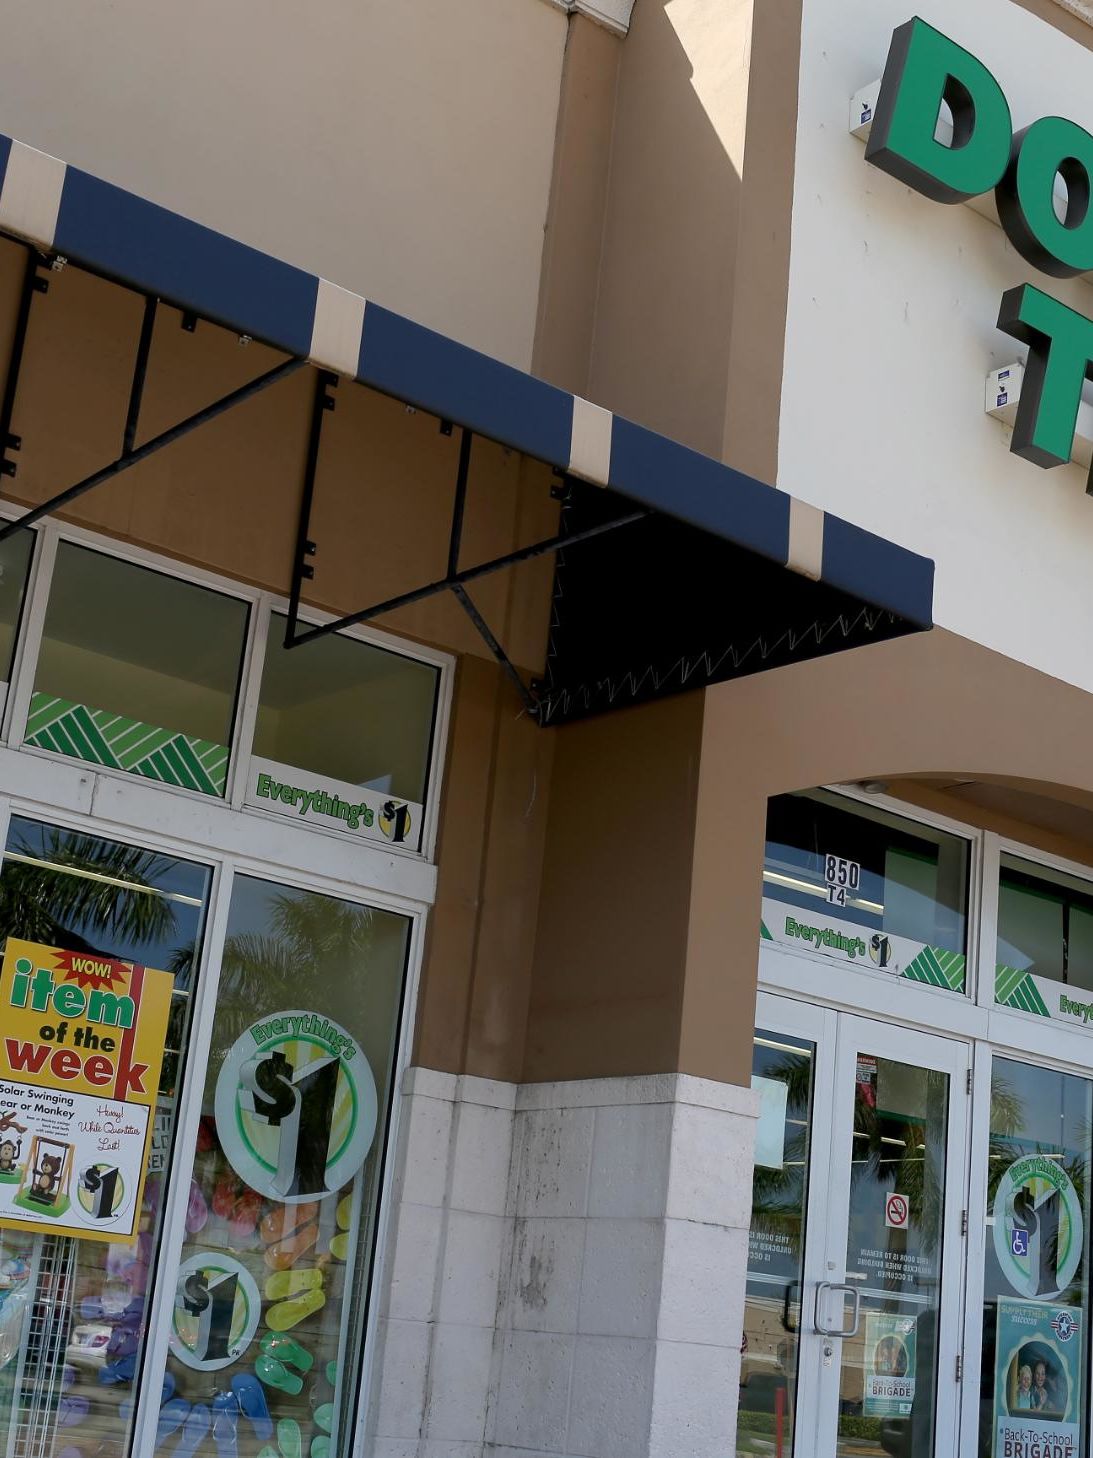 FDA issues warning to Dollar Tree about selling 'potentially unsafe drugs'  | CNN